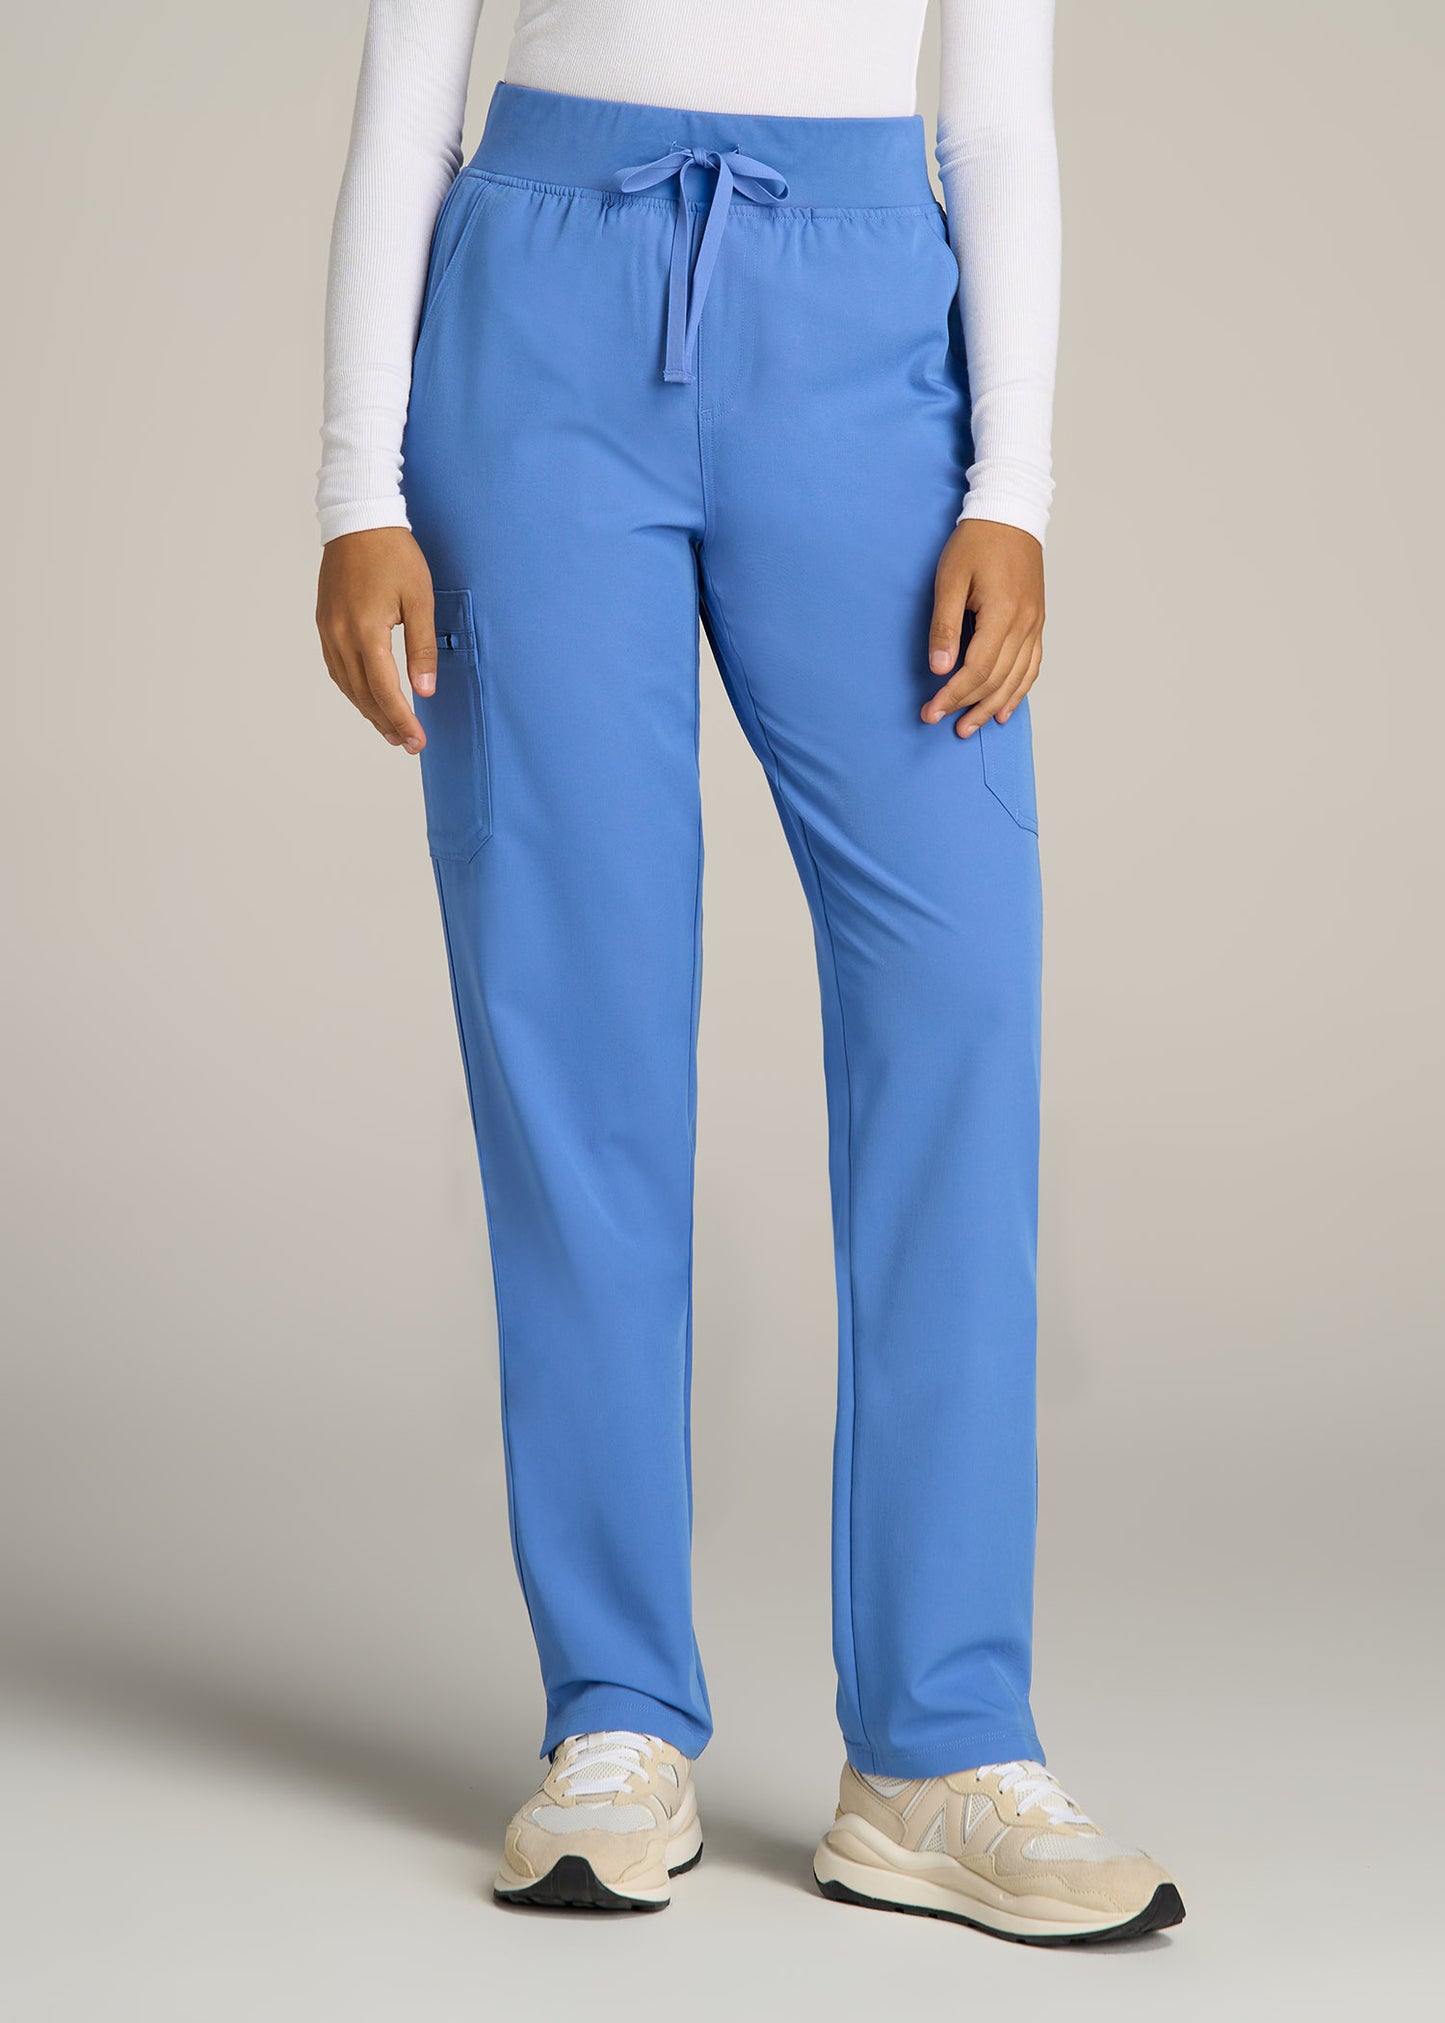 Scrub Tops and Pants for Women: Just 10 Dollars! - Blue Sky Scrubs